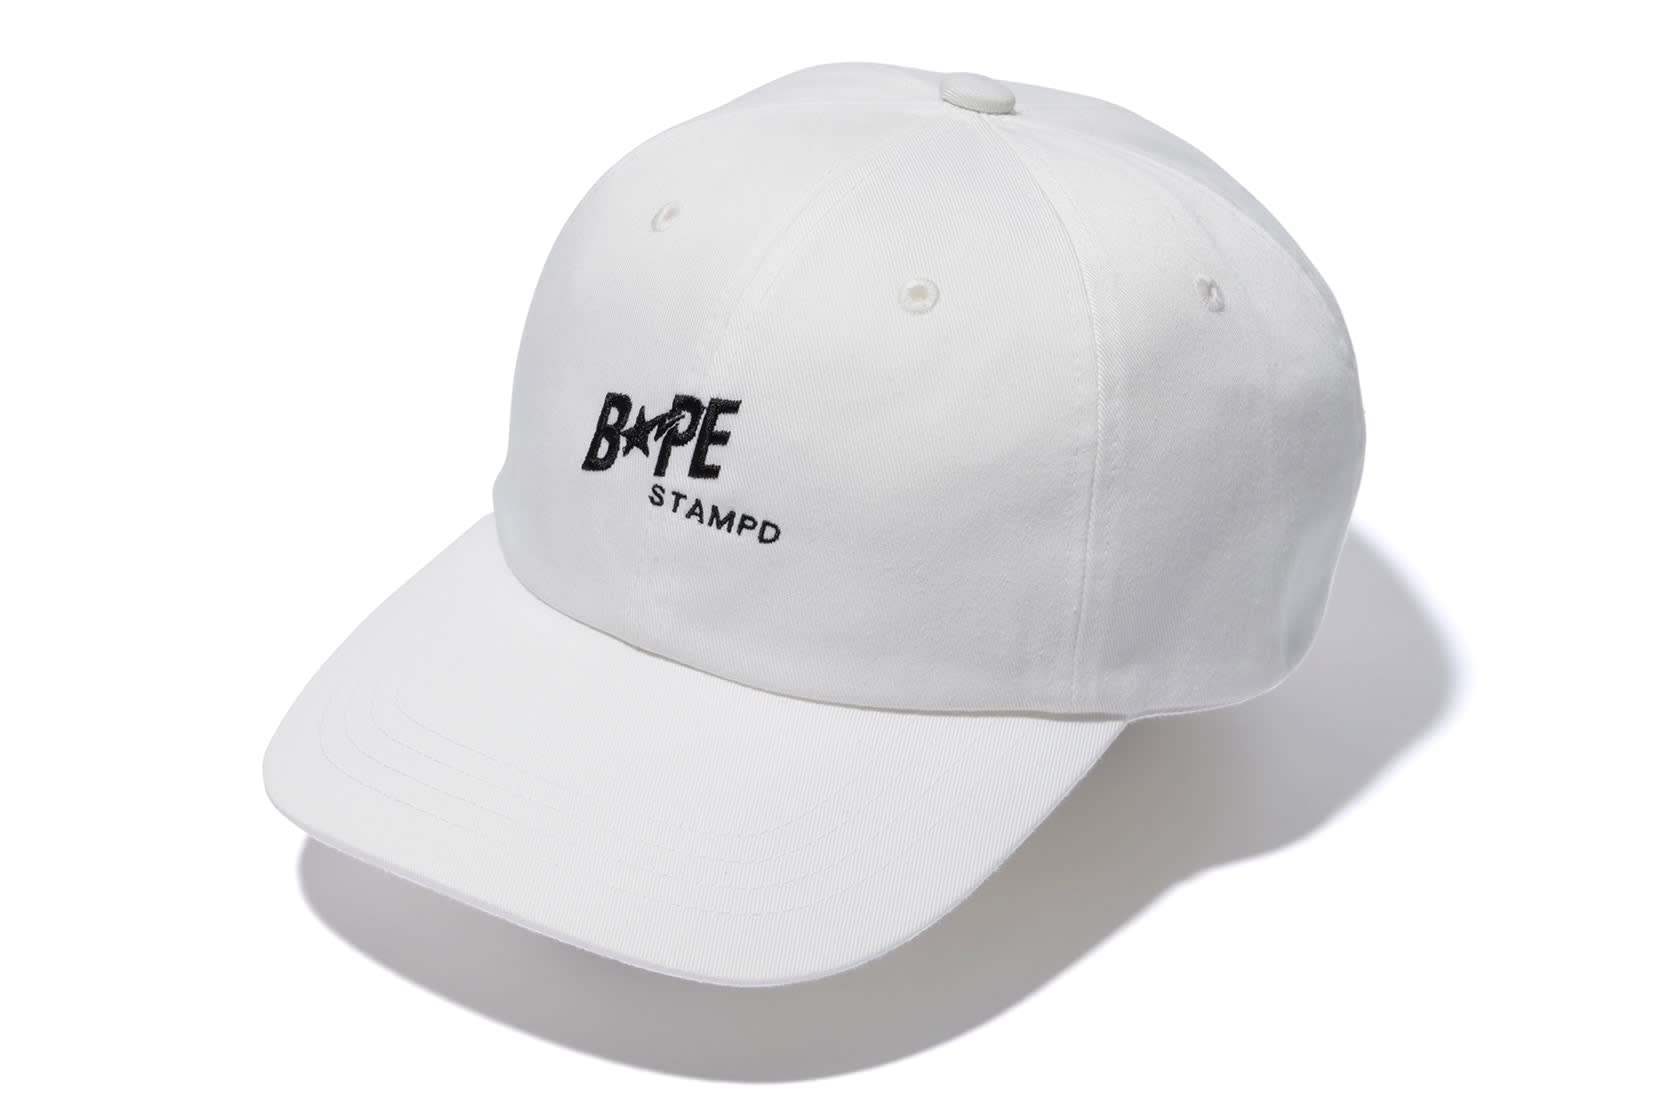 Bape x Stampd Collection 9